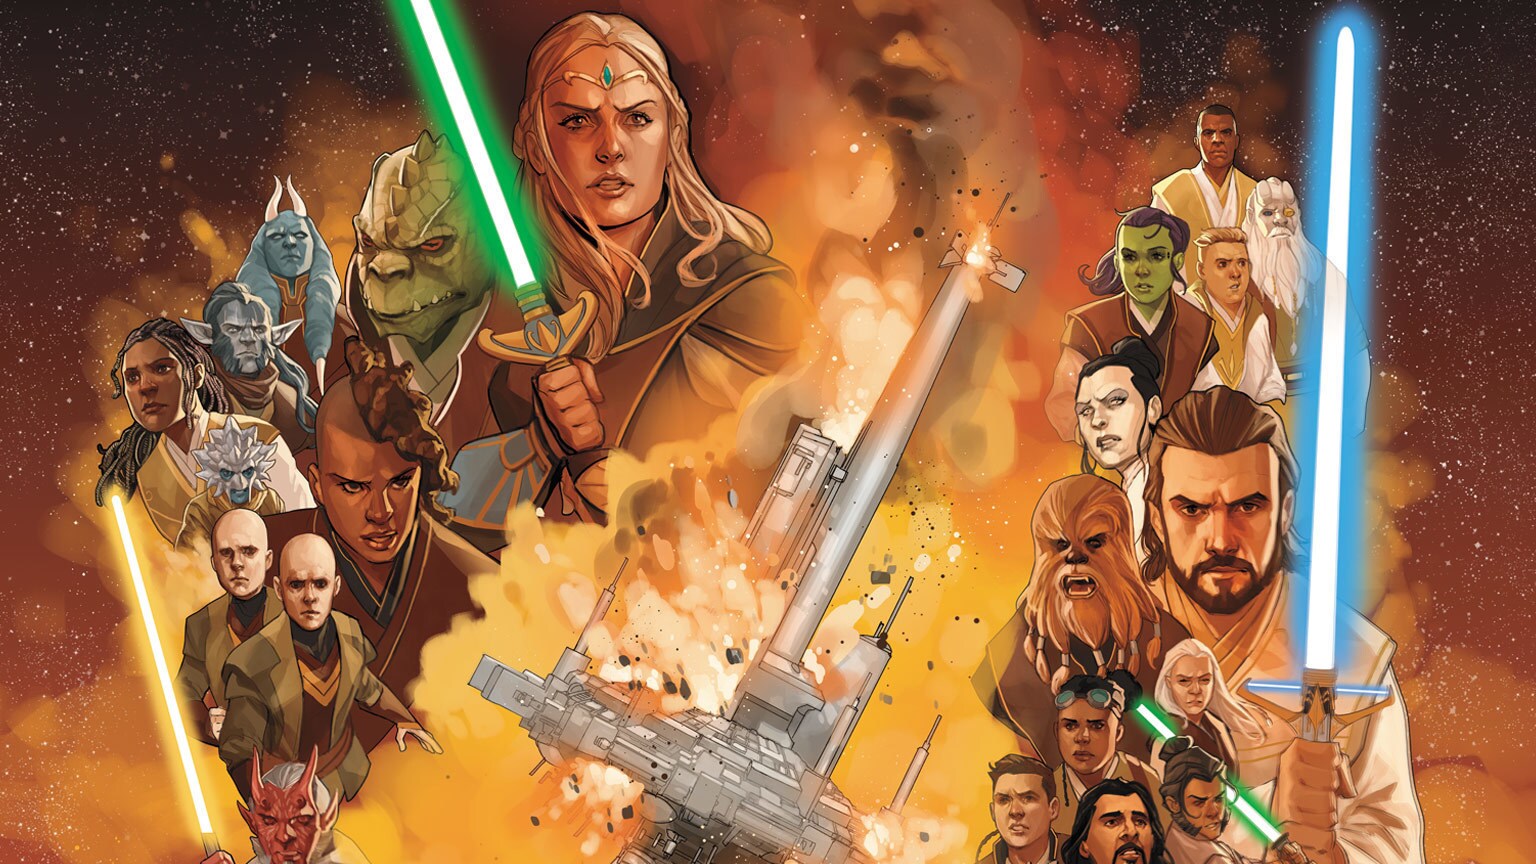 Celebrate One Year of Star Wars: The High Republic with an Anniversary Special